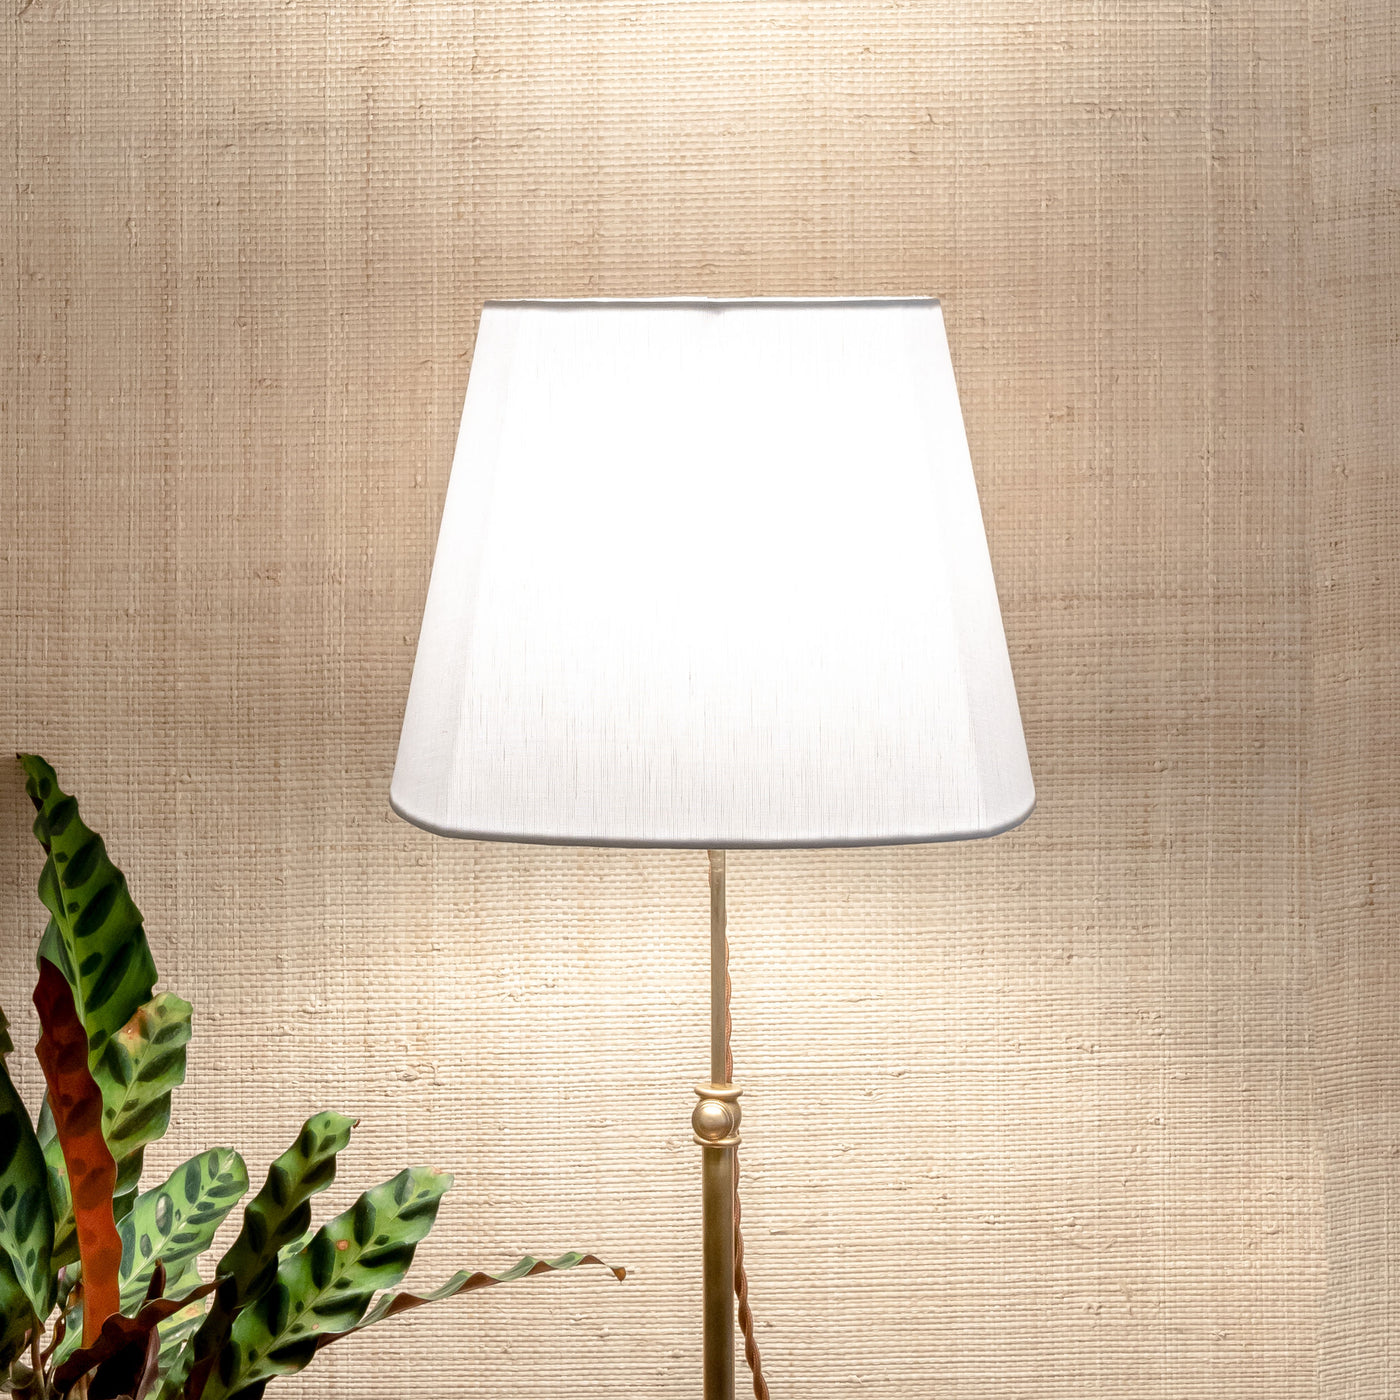 Rounded Square Linen Lampshade | Newport Lamp And Shade | Located in Newport, RI